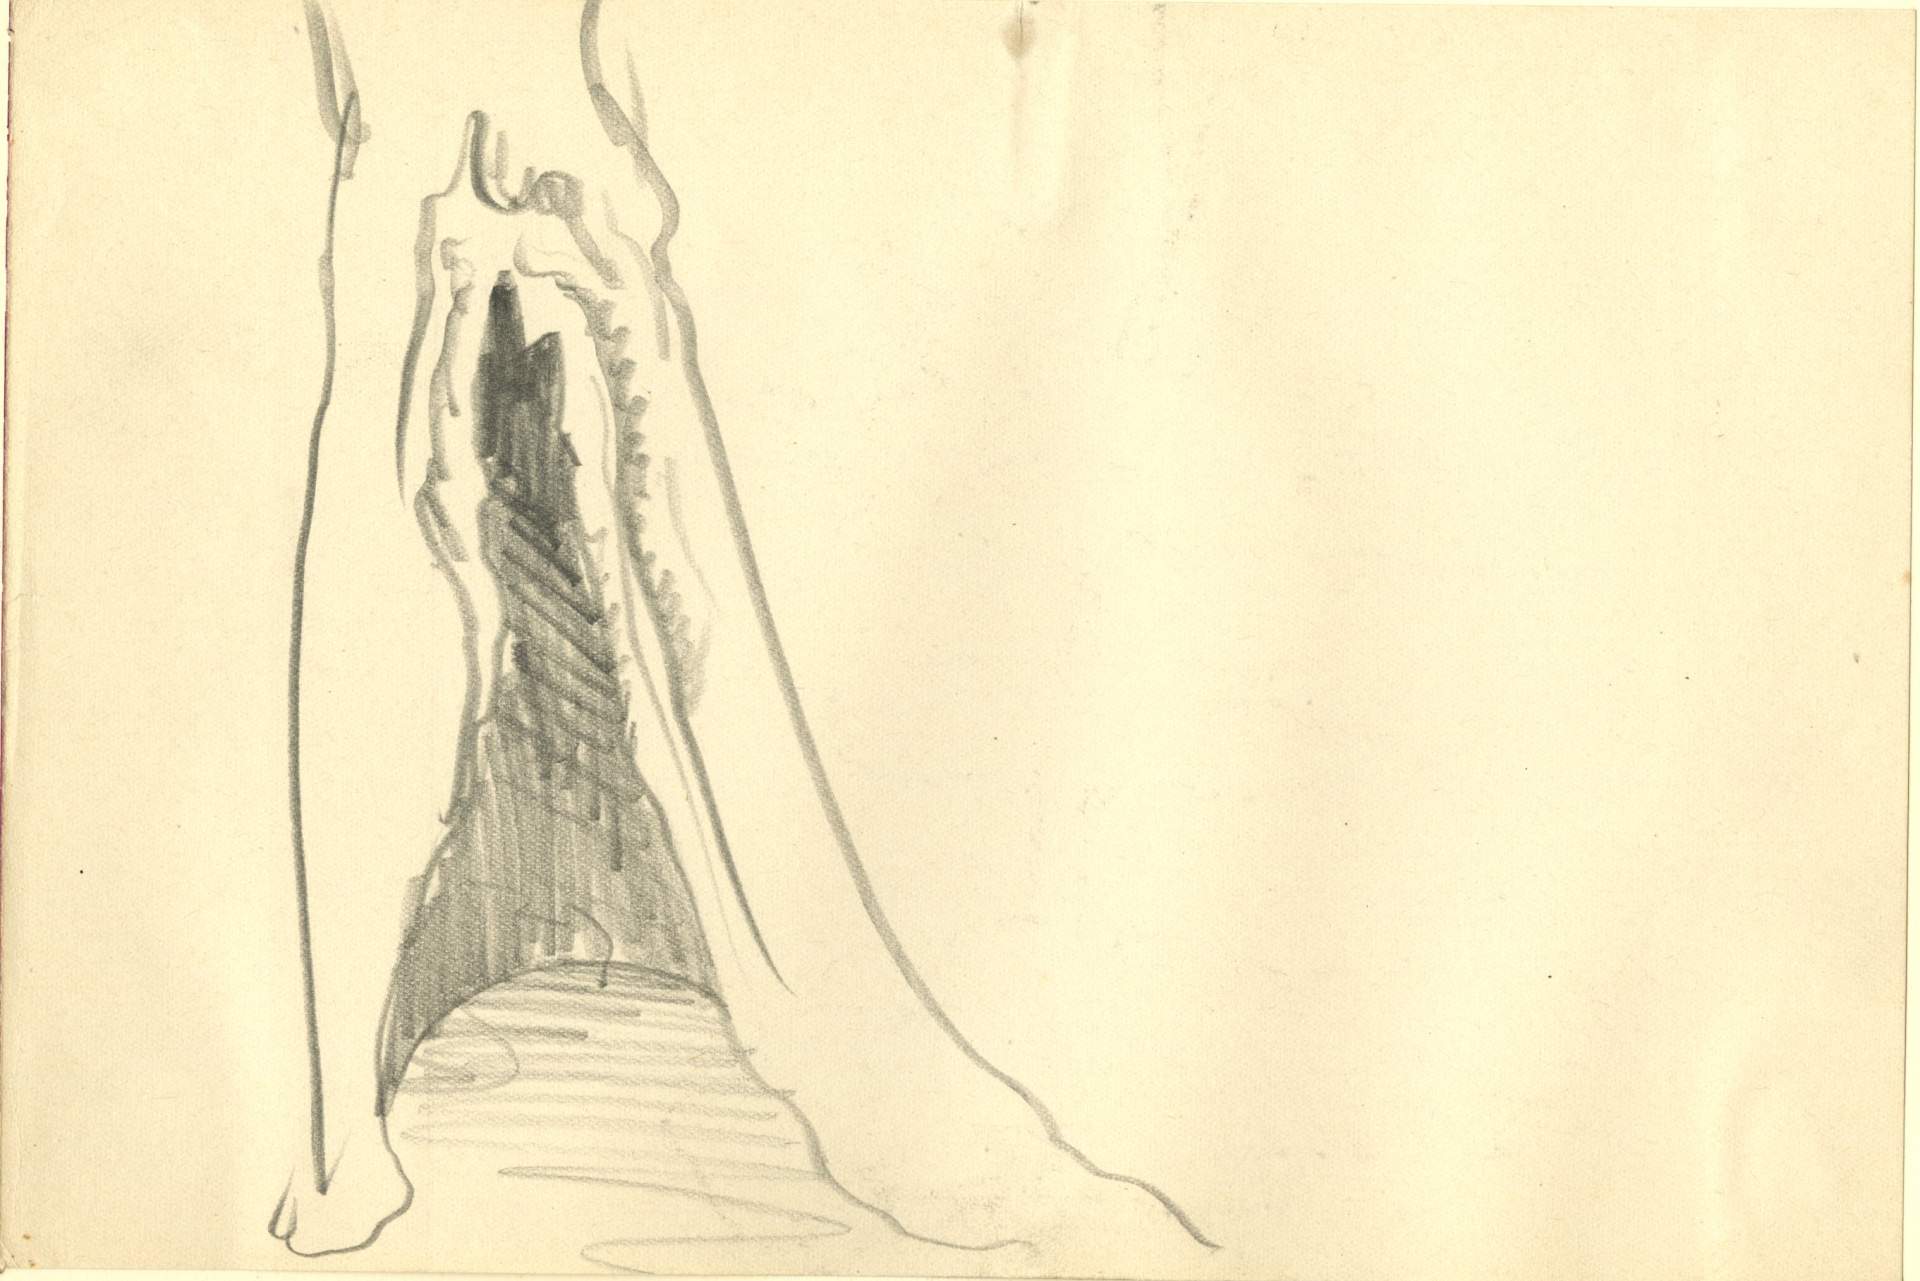 Sketch of view inside tree trunk